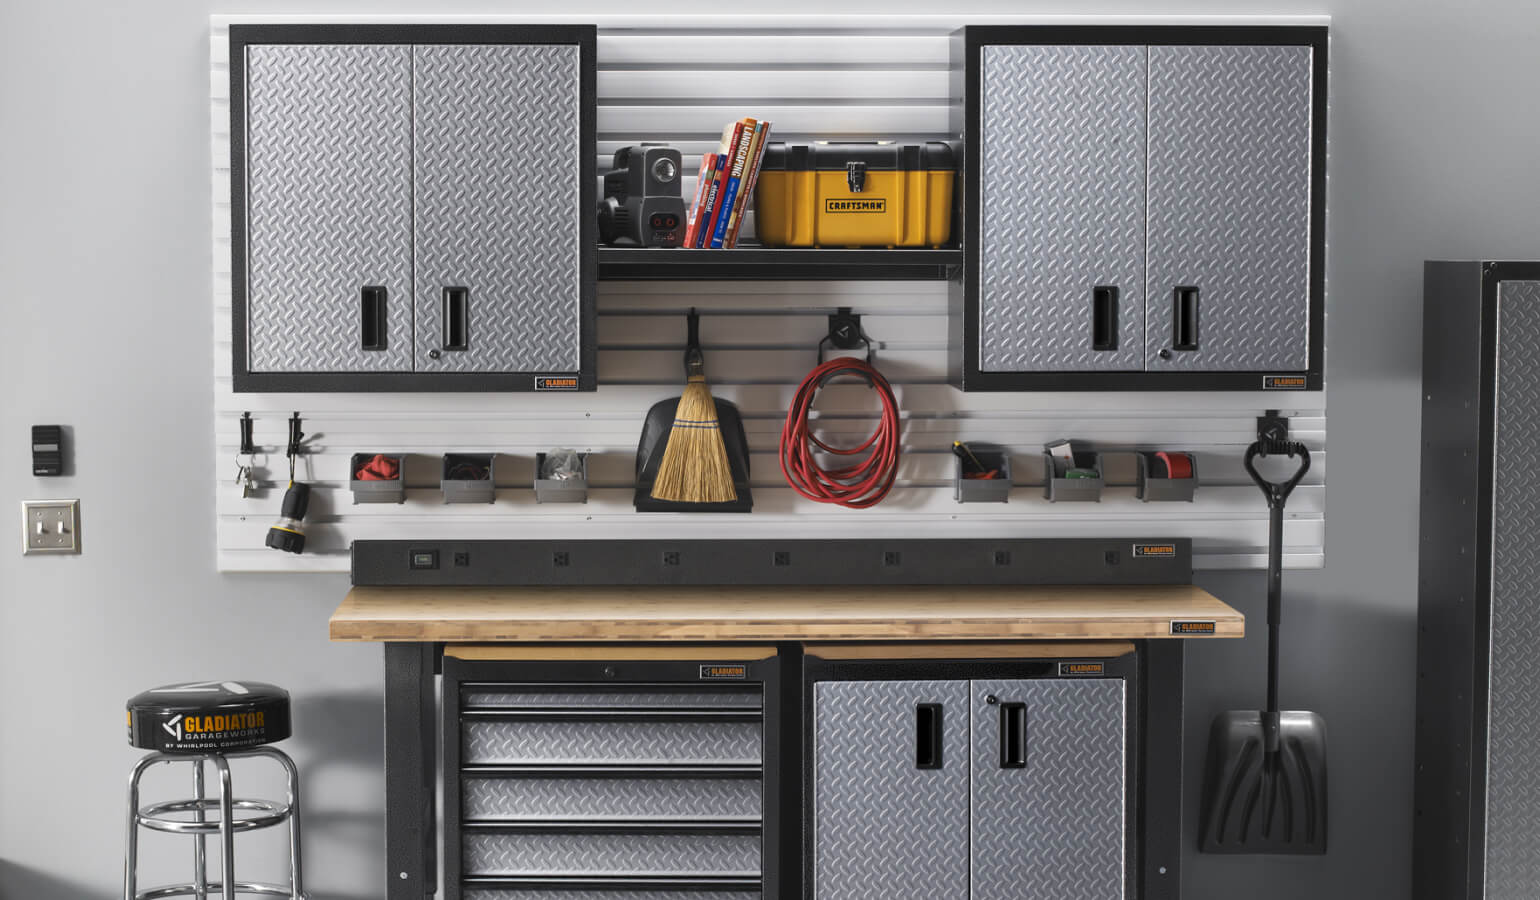 A garage woodworking space, outfitted with various Gladiator brand wall cabinets, shelves, and workbenches.